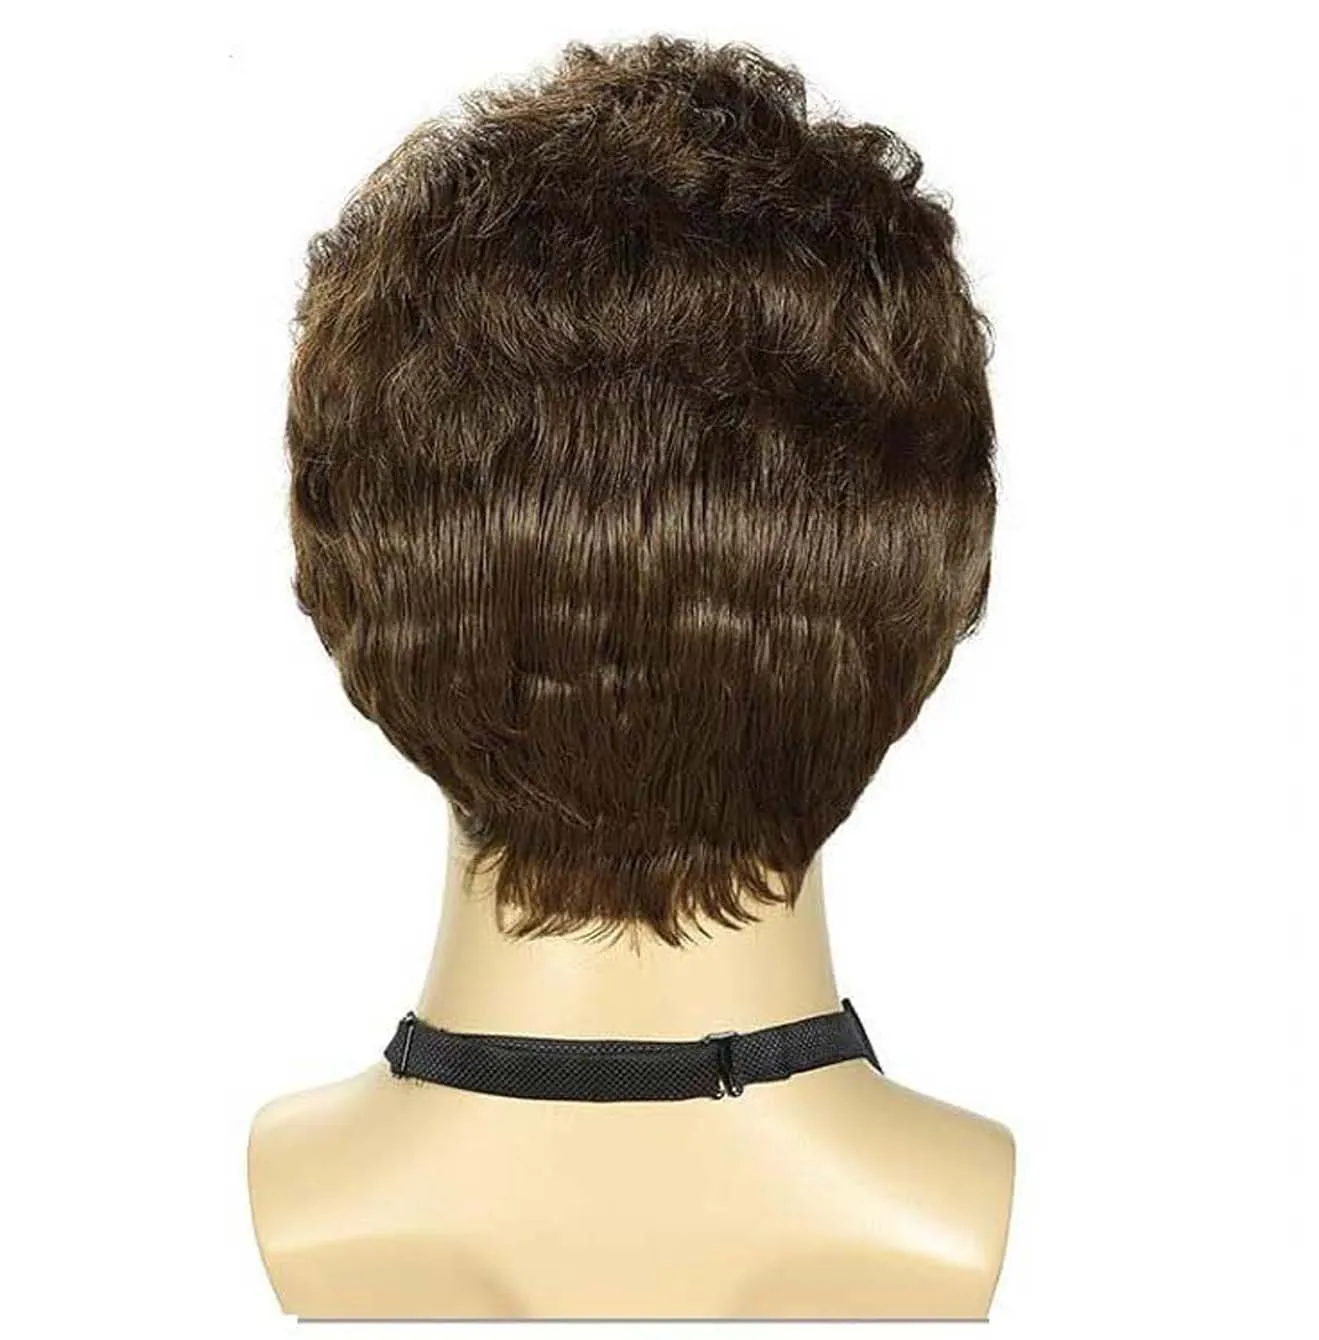 Synthetic Hair Short Curly Brown Wig for men Layered Heat Resistant Wigs With Bangs For Daily Use